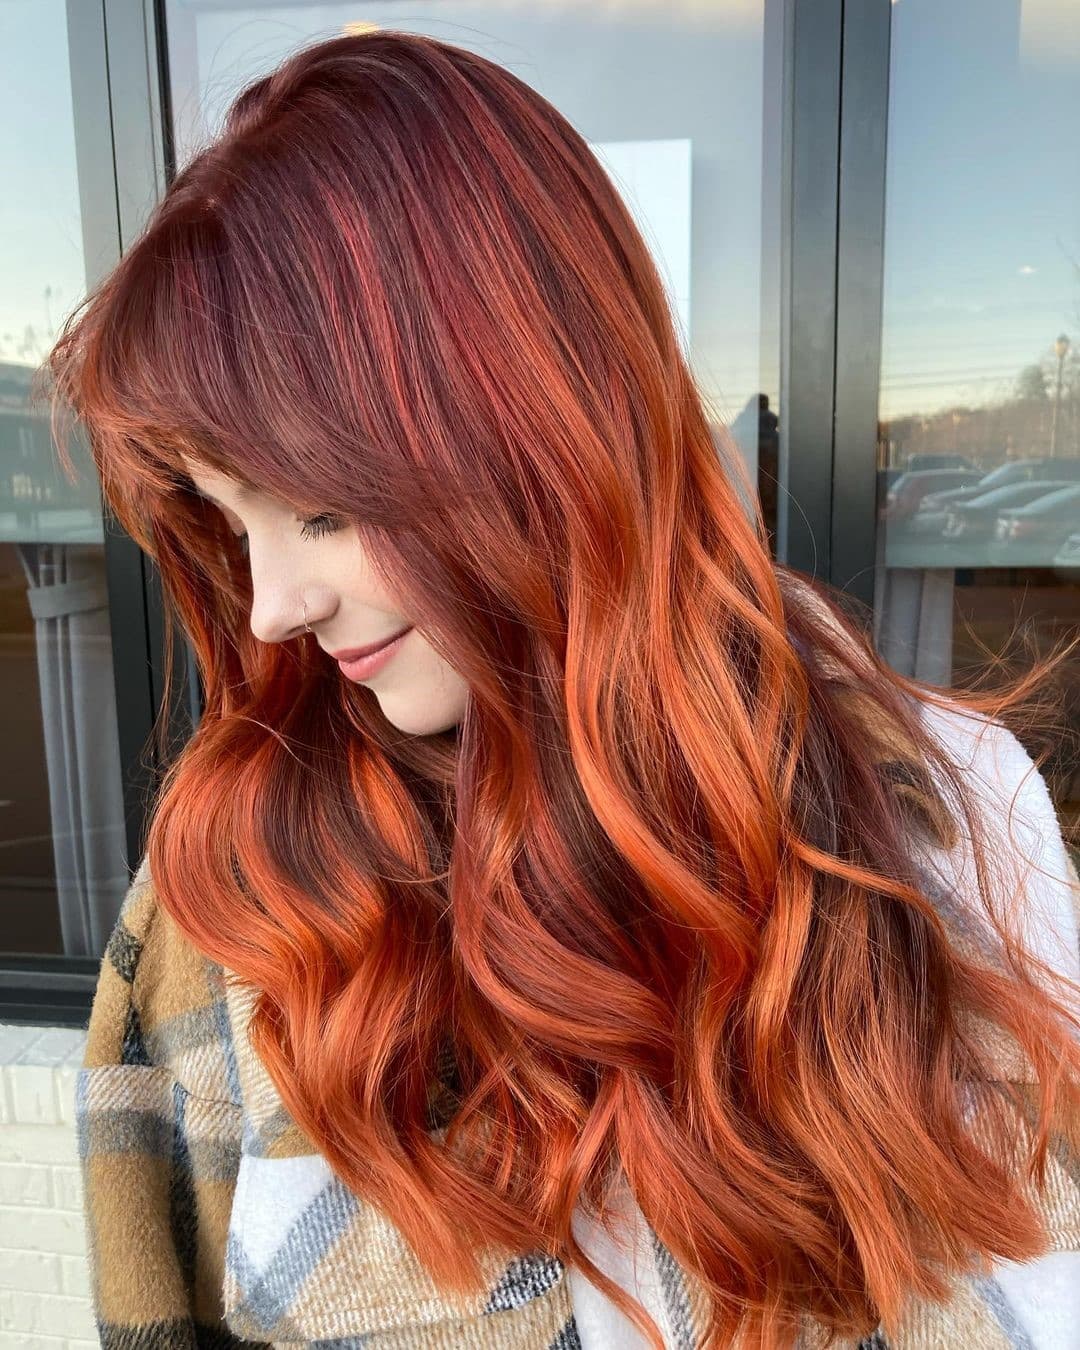 https://therighthairstyles.com/wp-content/uploads/2014/12/7-pumpkin-spice-hair-color.jpg